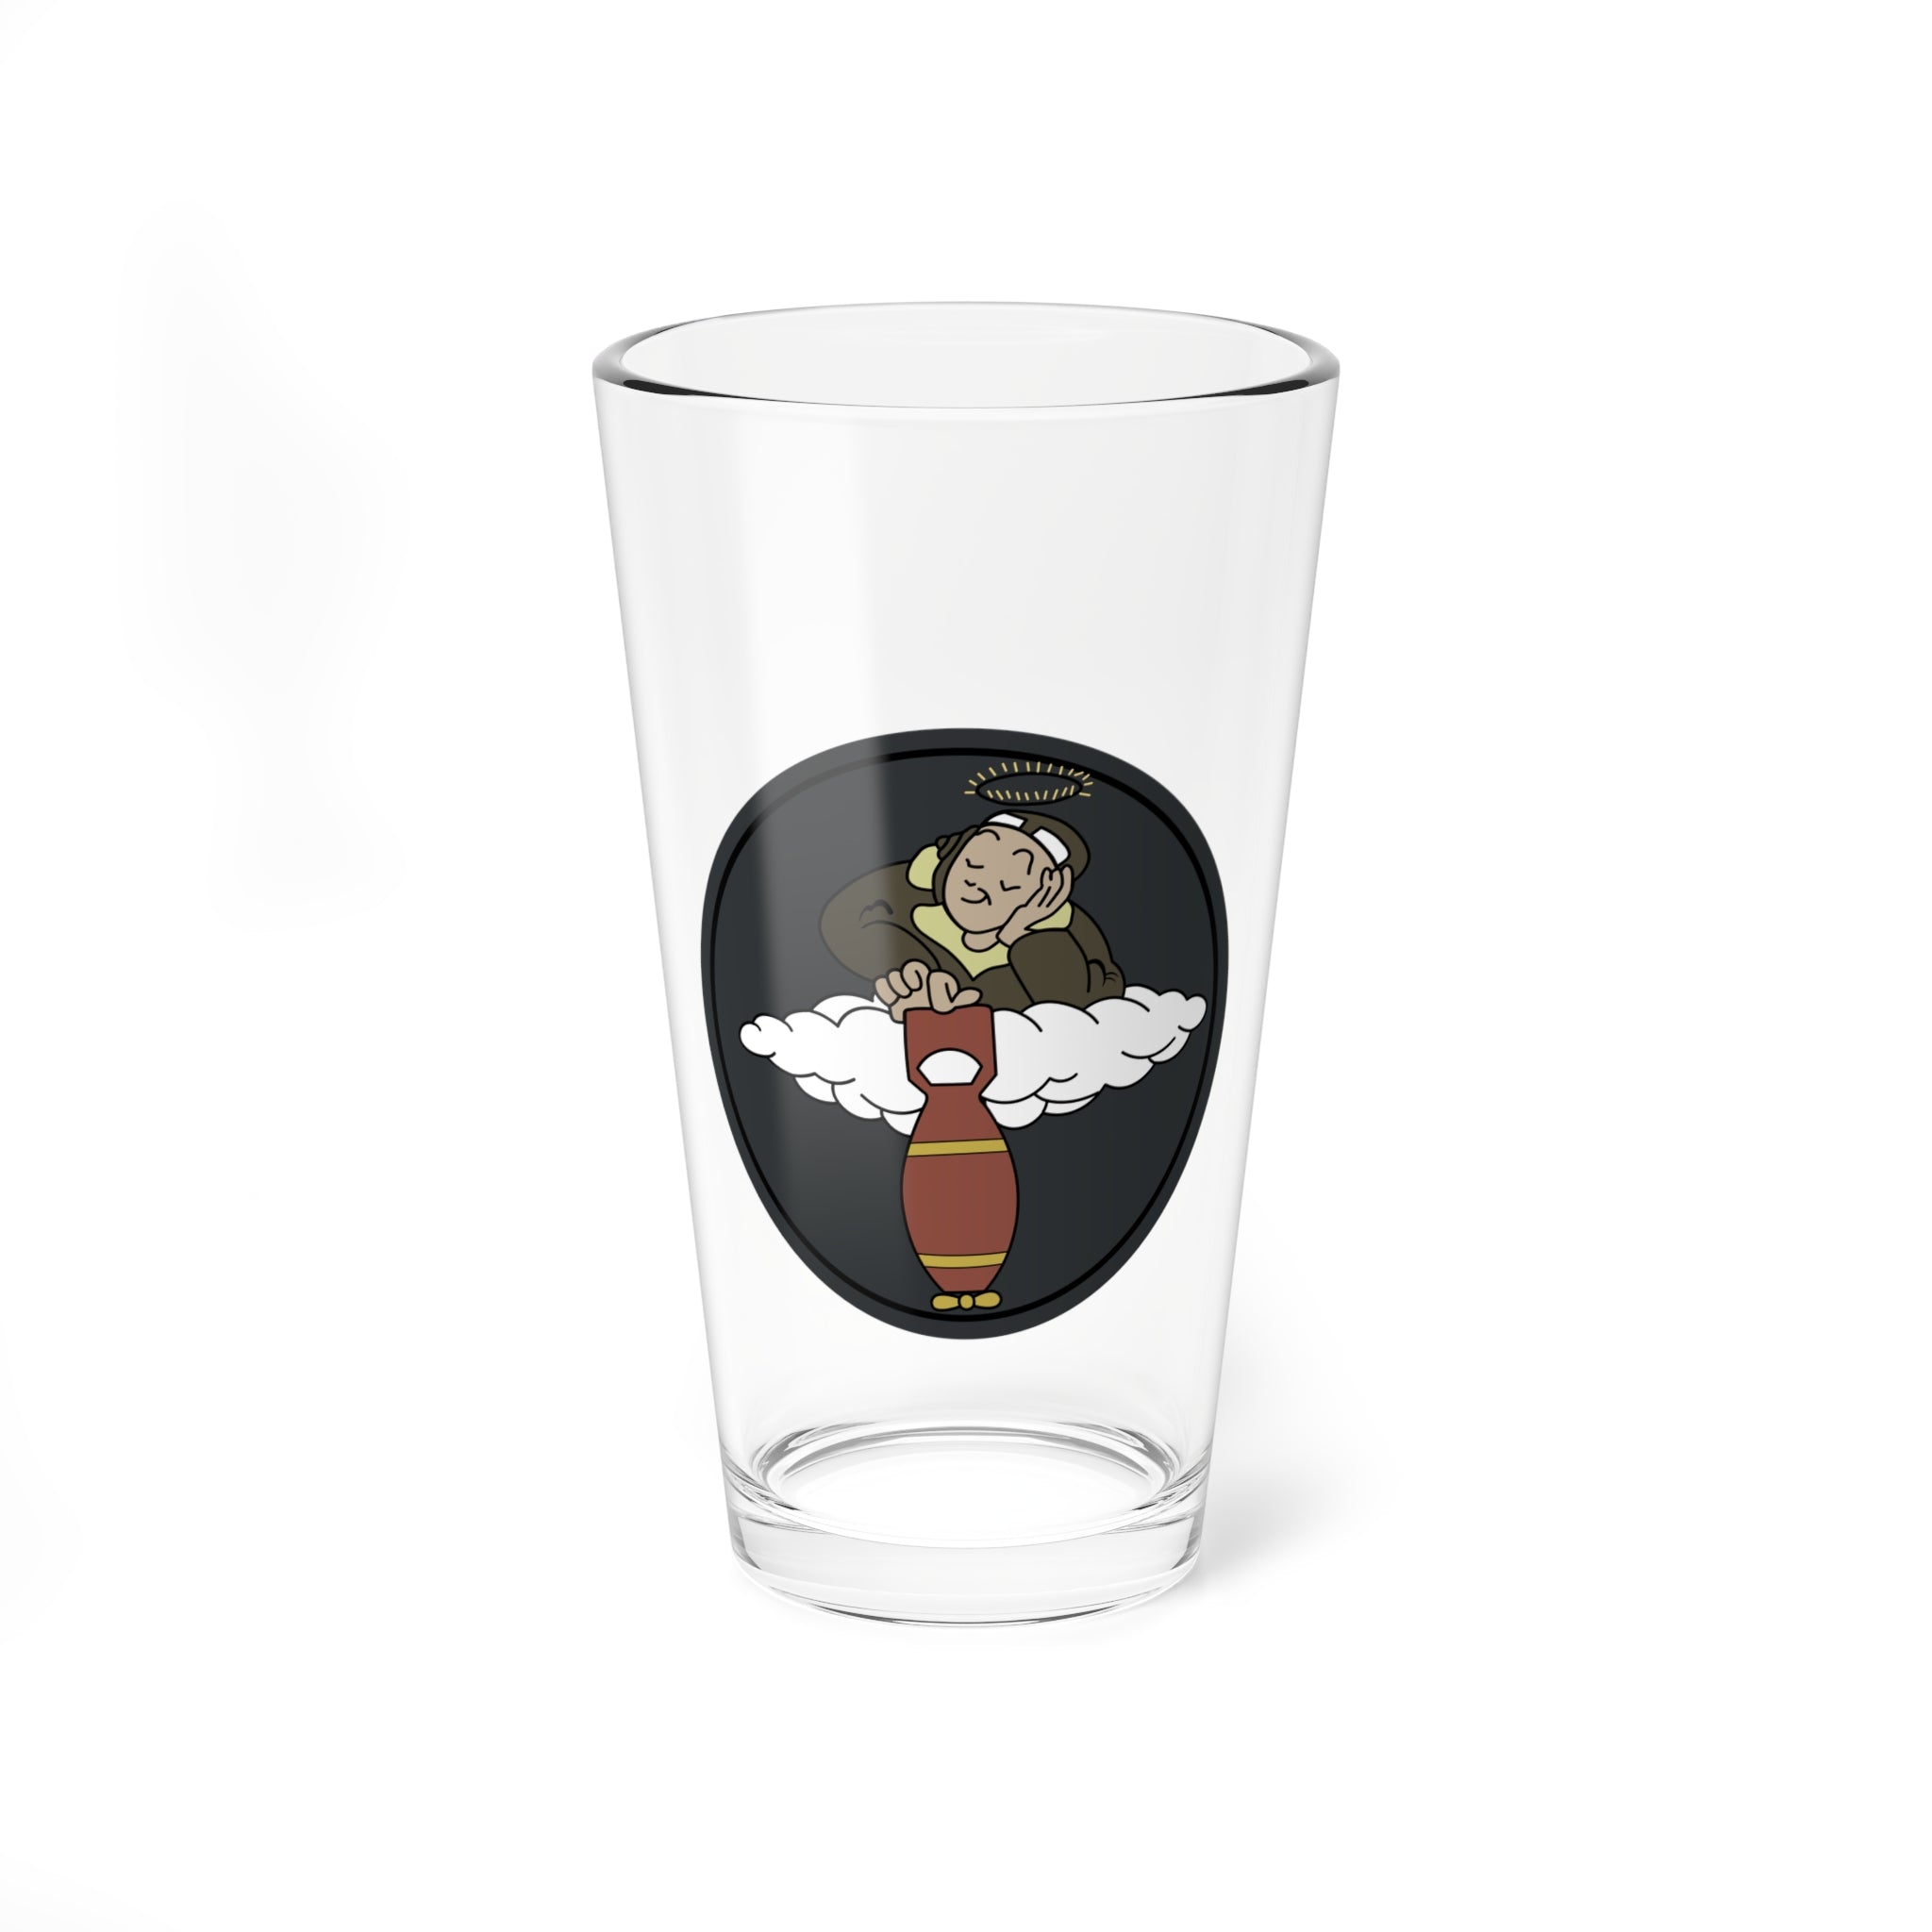 358th Bombardement Squadron Pint Glass, US Army Air Force Bombing Squadron from WWII